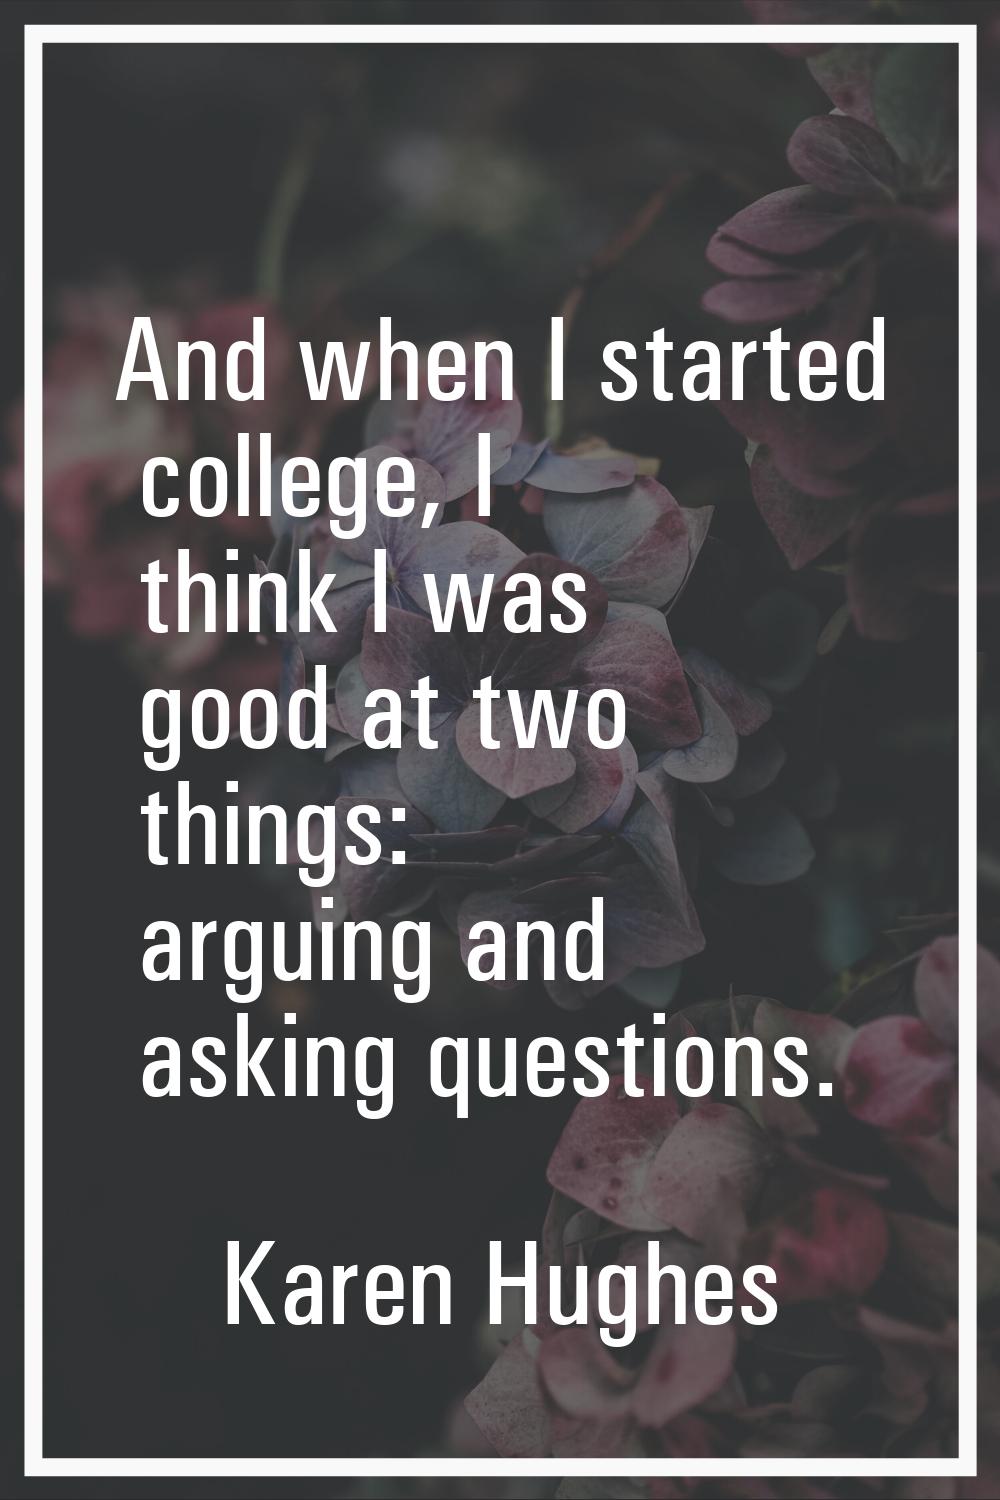 And when I started college, I think I was good at two things: arguing and asking questions.